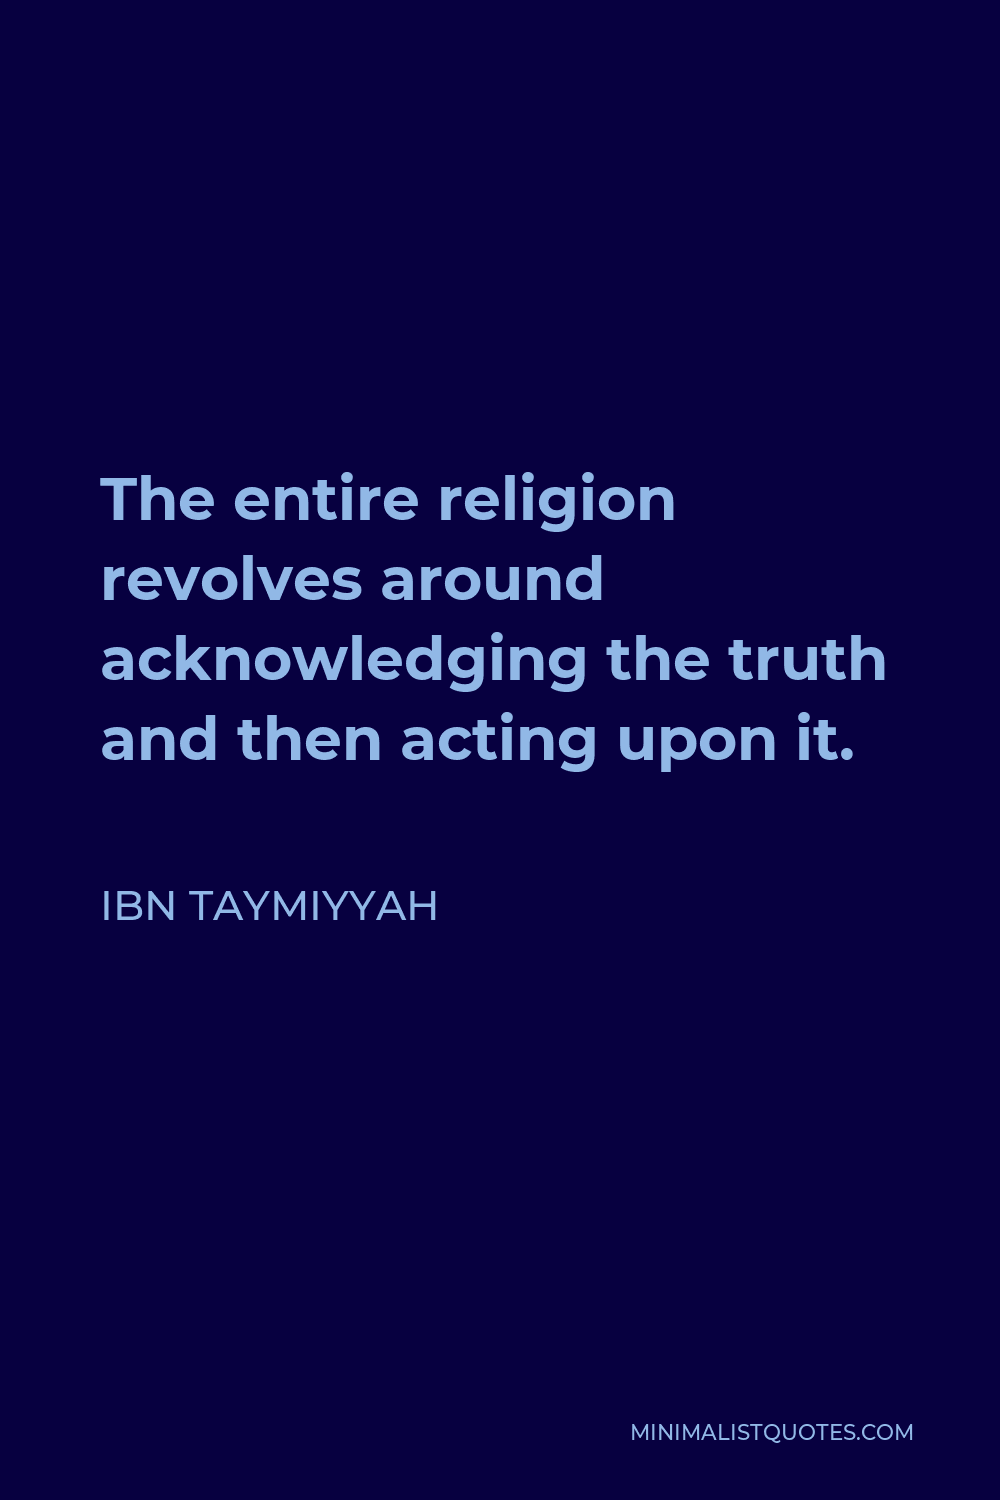 Ibn Taymiyyah Quote - The entire religion revolves around acknowledging the truth and then acting upon it.